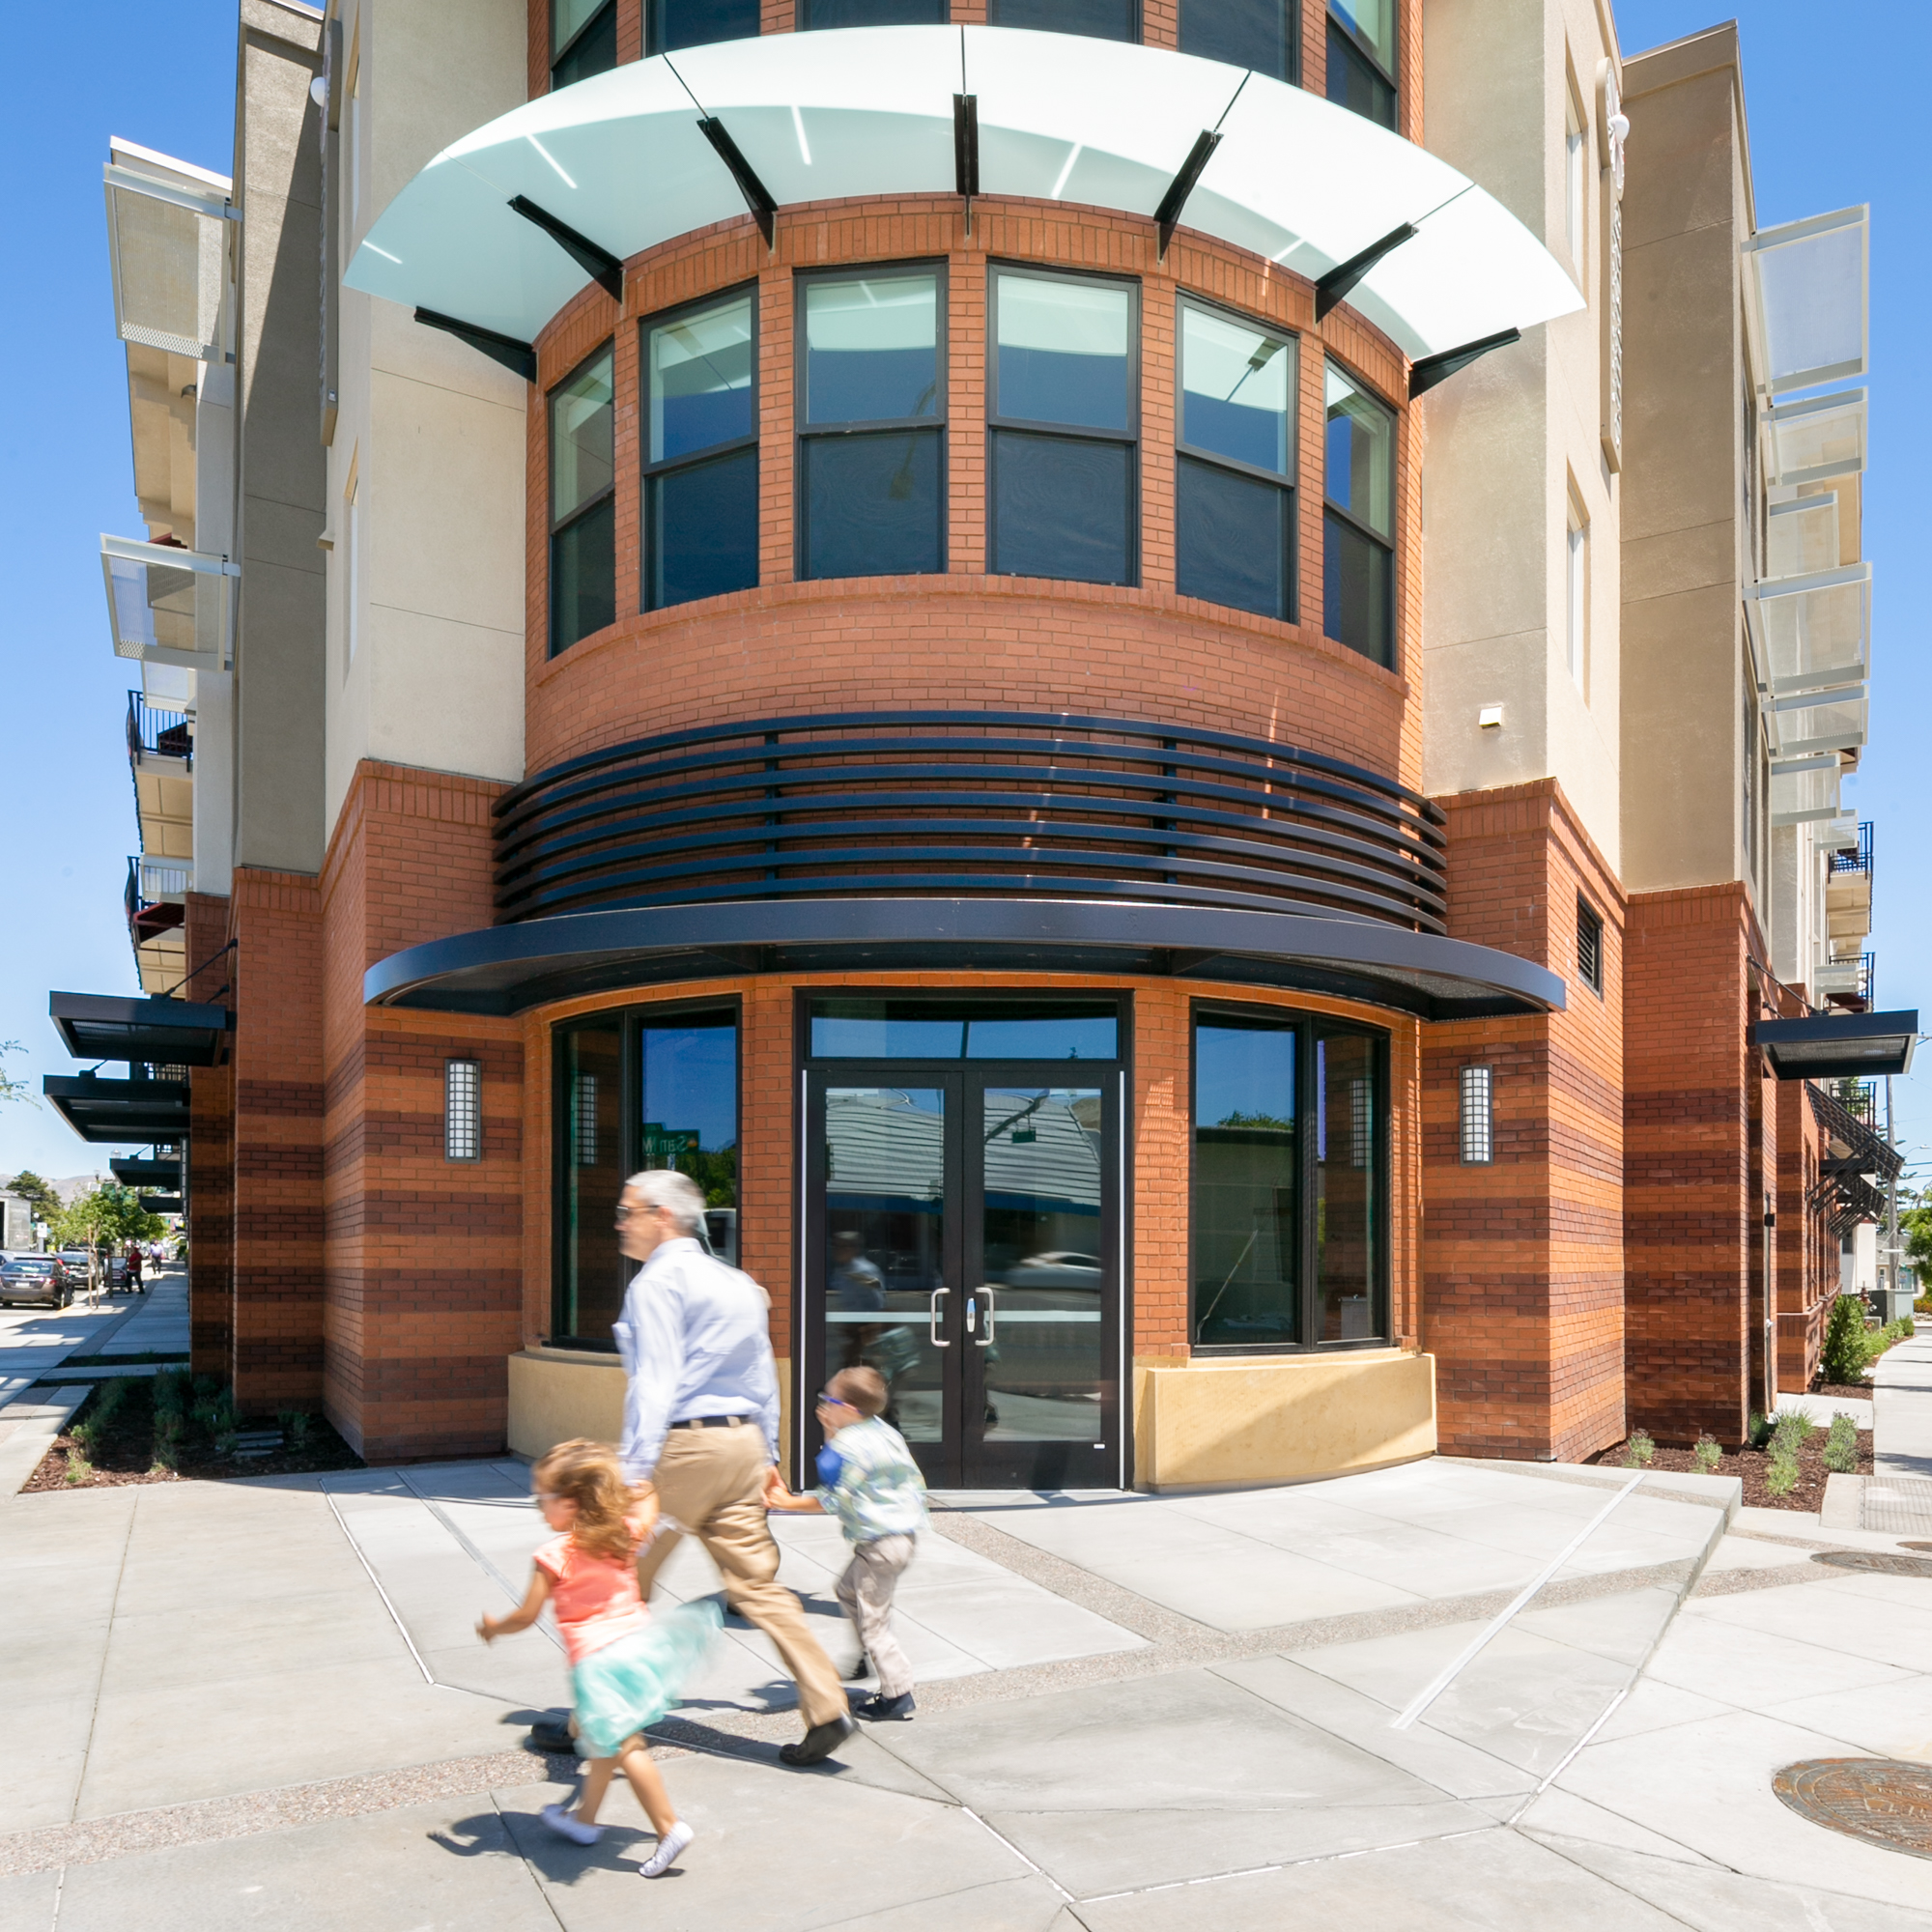 San Leandro commercial architecture photography by brightroomSF of Aperture - saresregisgroup-3.jpg